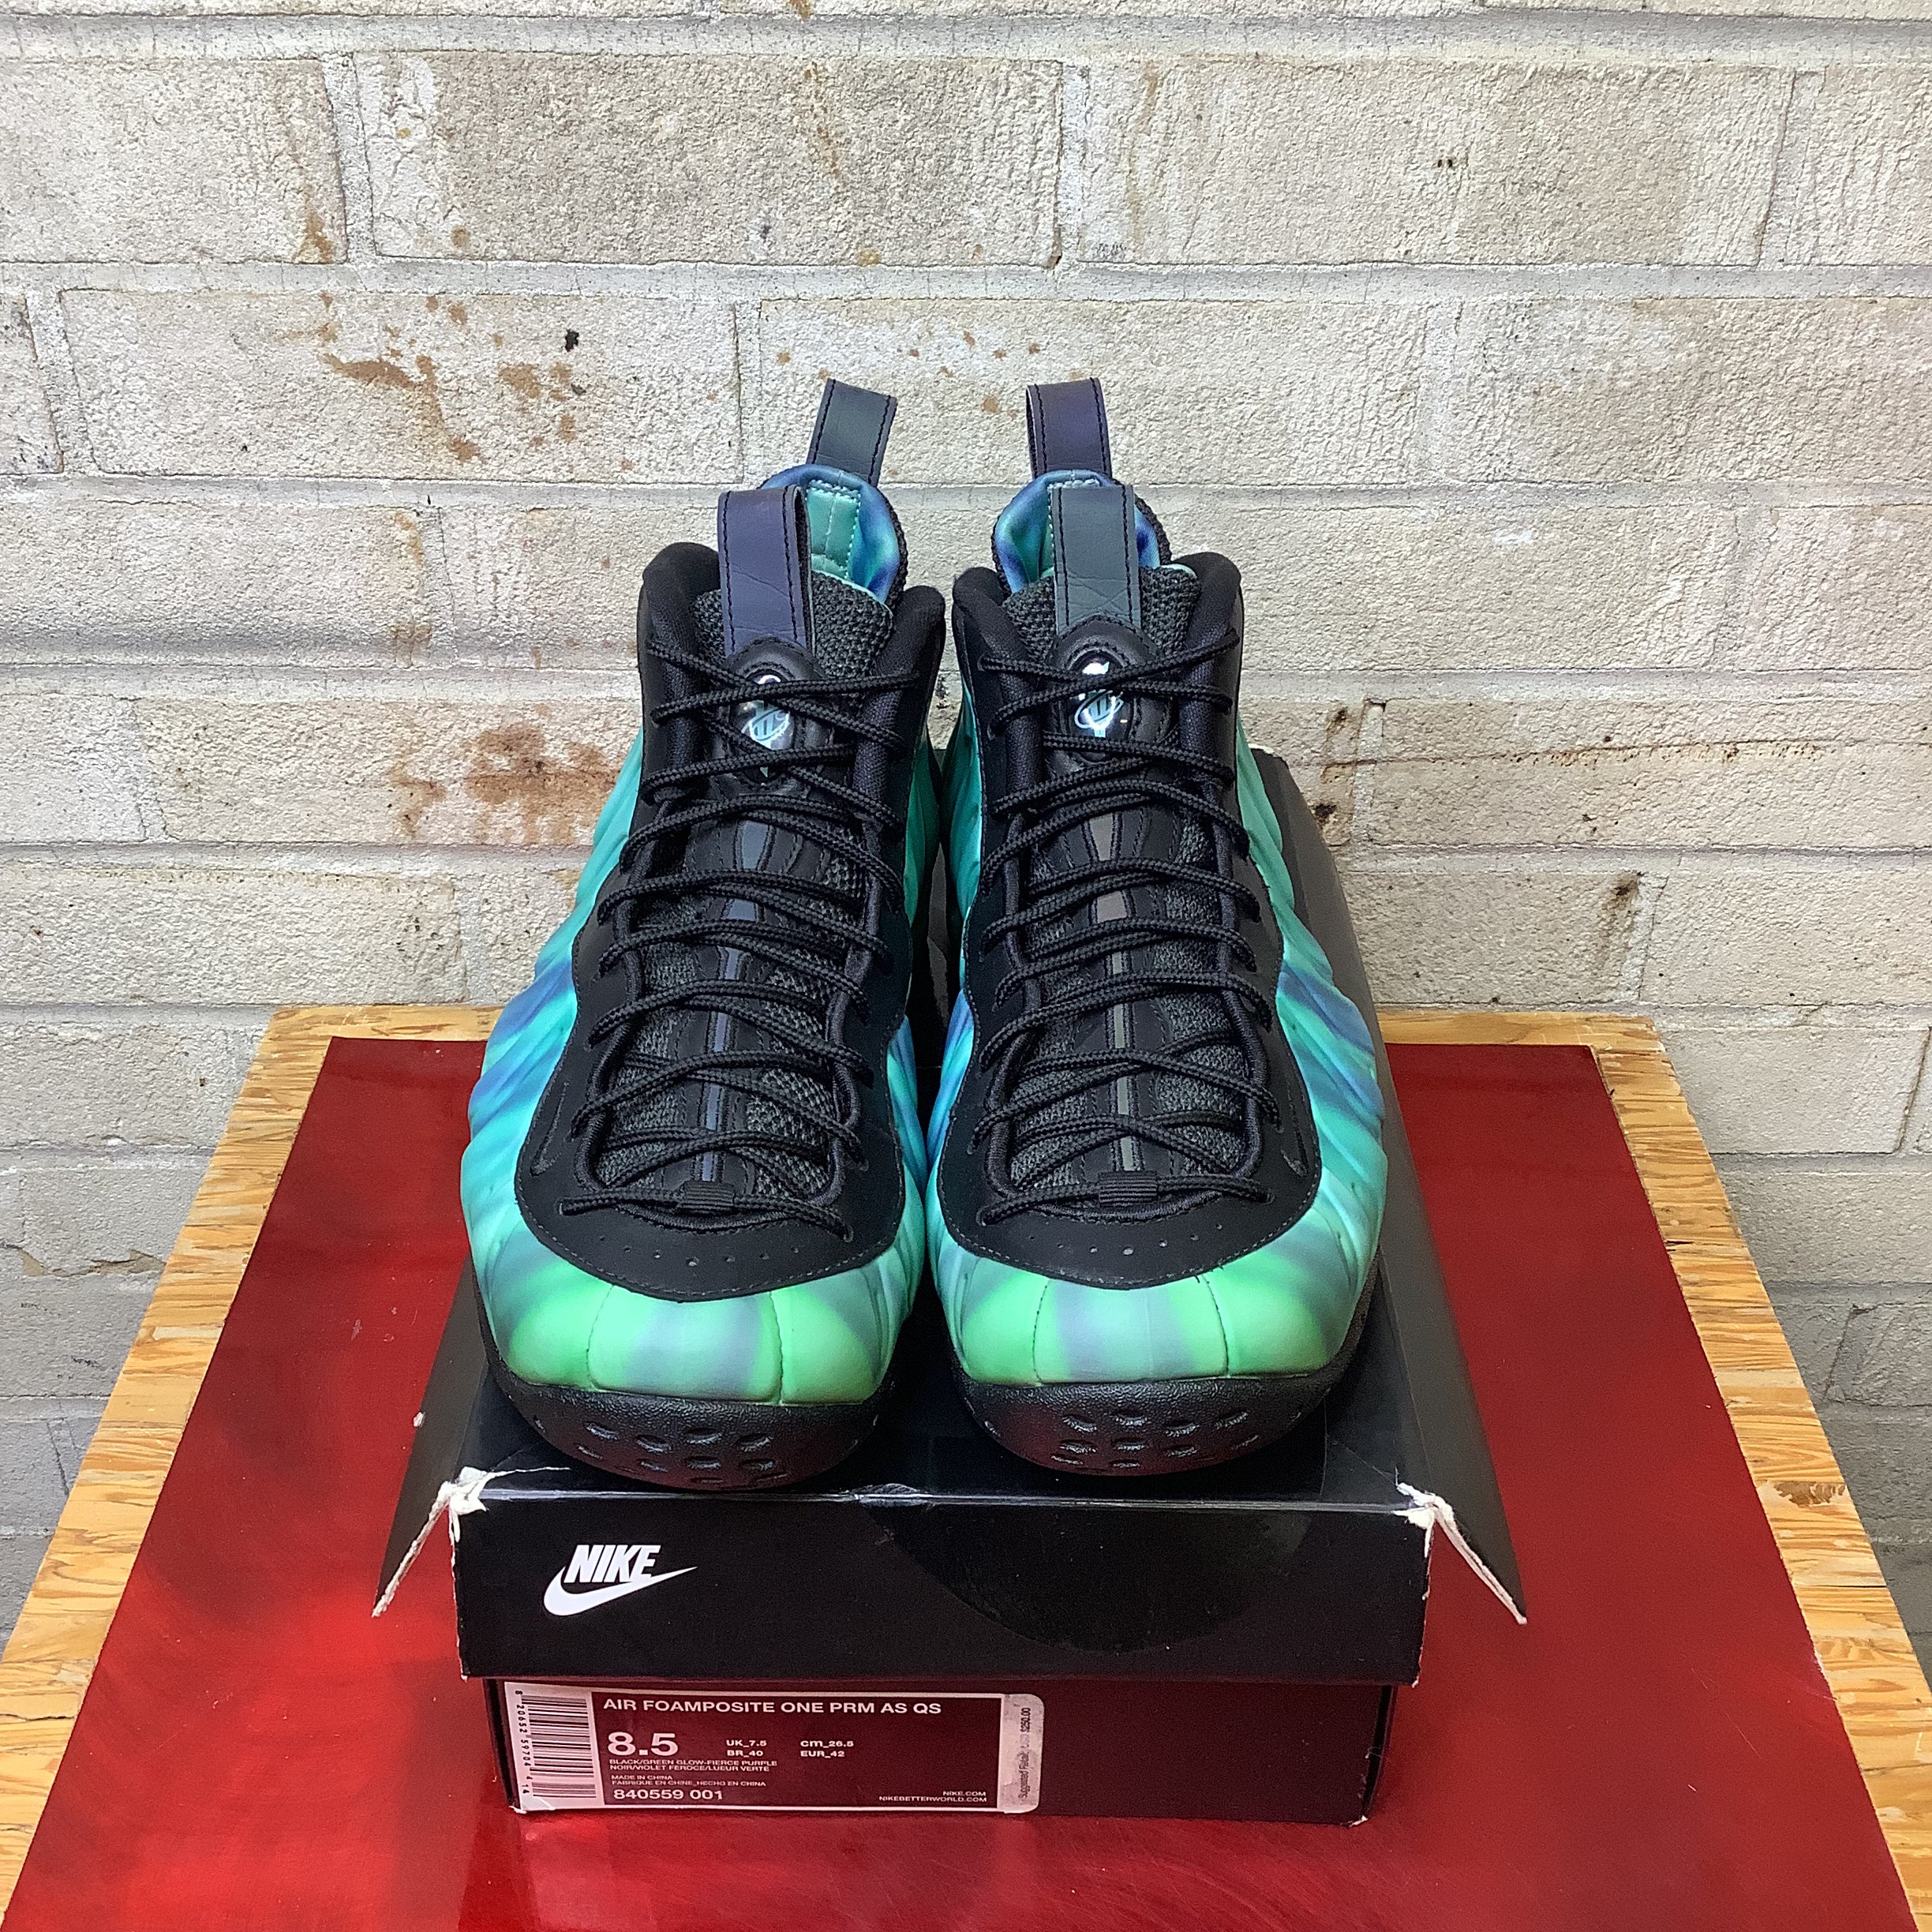 NIKE AIR FOAMPOSITE ONE NORTHERN LIGHTS SIZE 8.5 840559-001